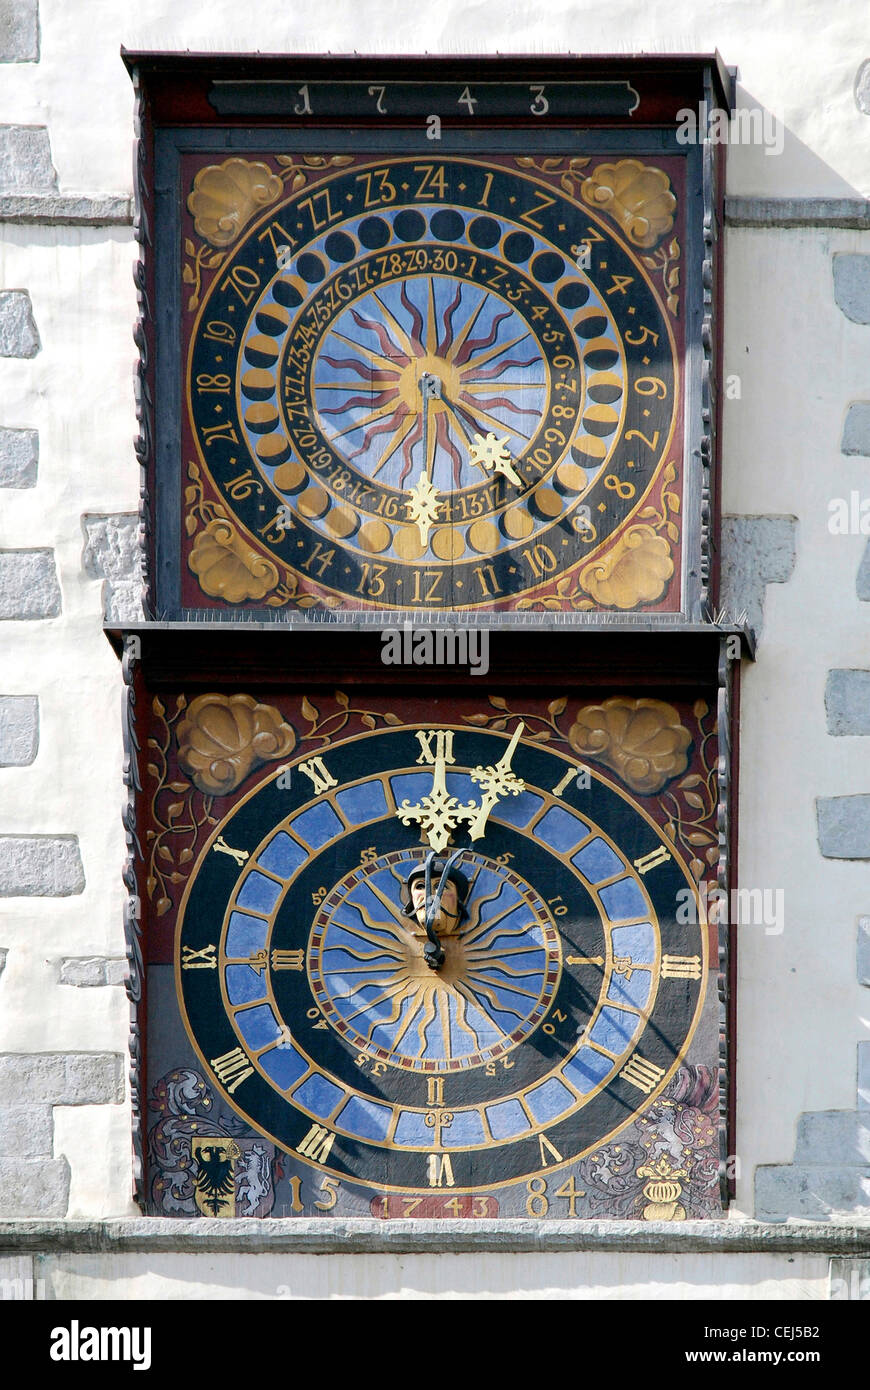 Suns clock at the old city hall of Goerlitz. Stock Photo